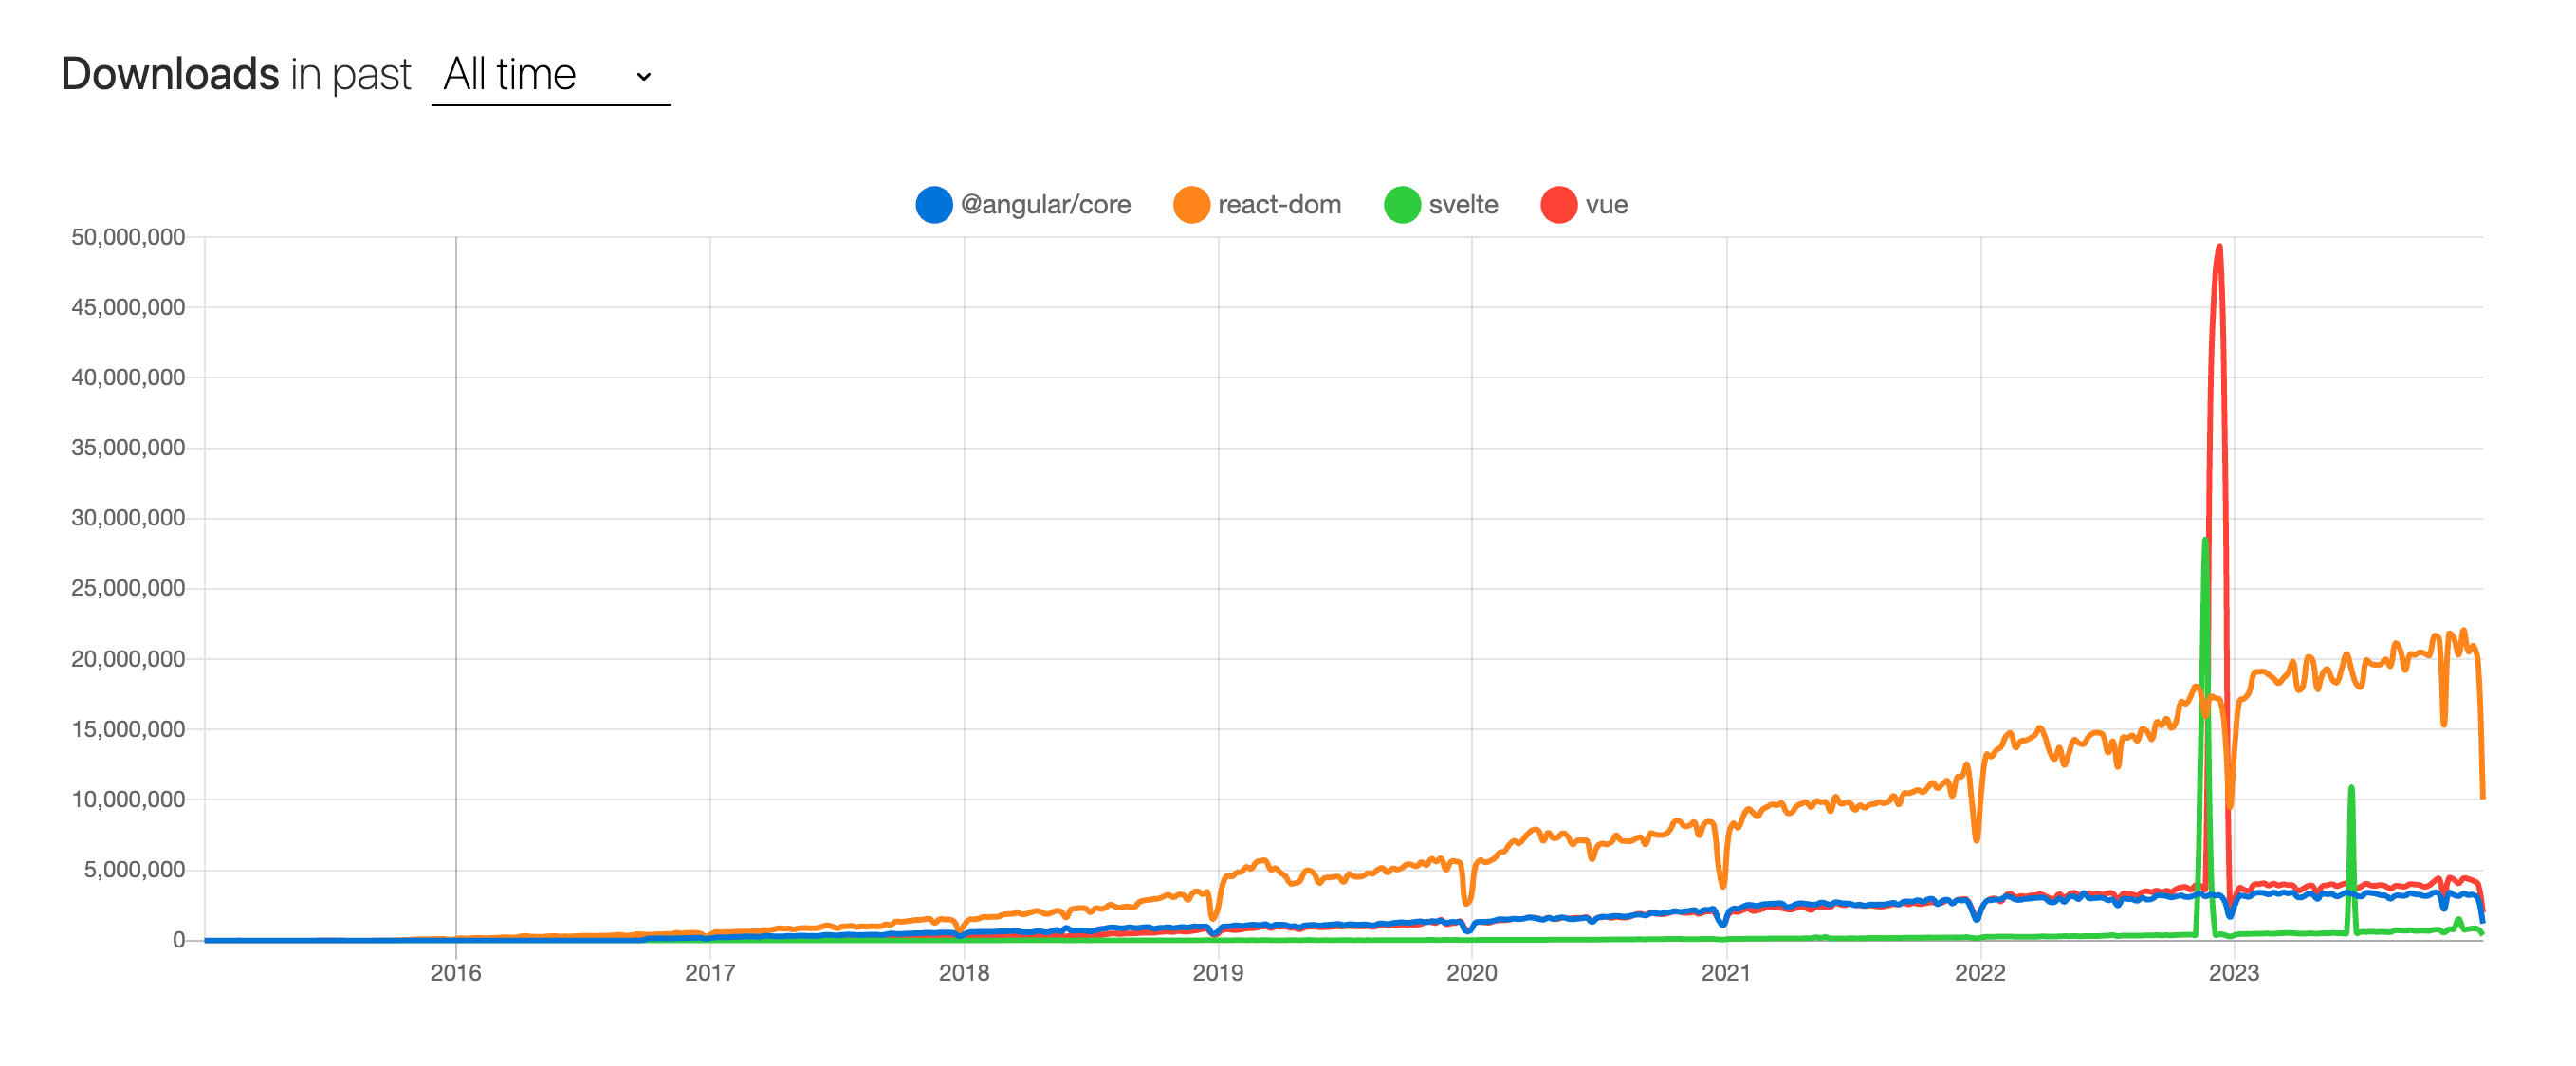 Timeseries graph of npm downloads comparing React, Angular, Vue, and Svelte.